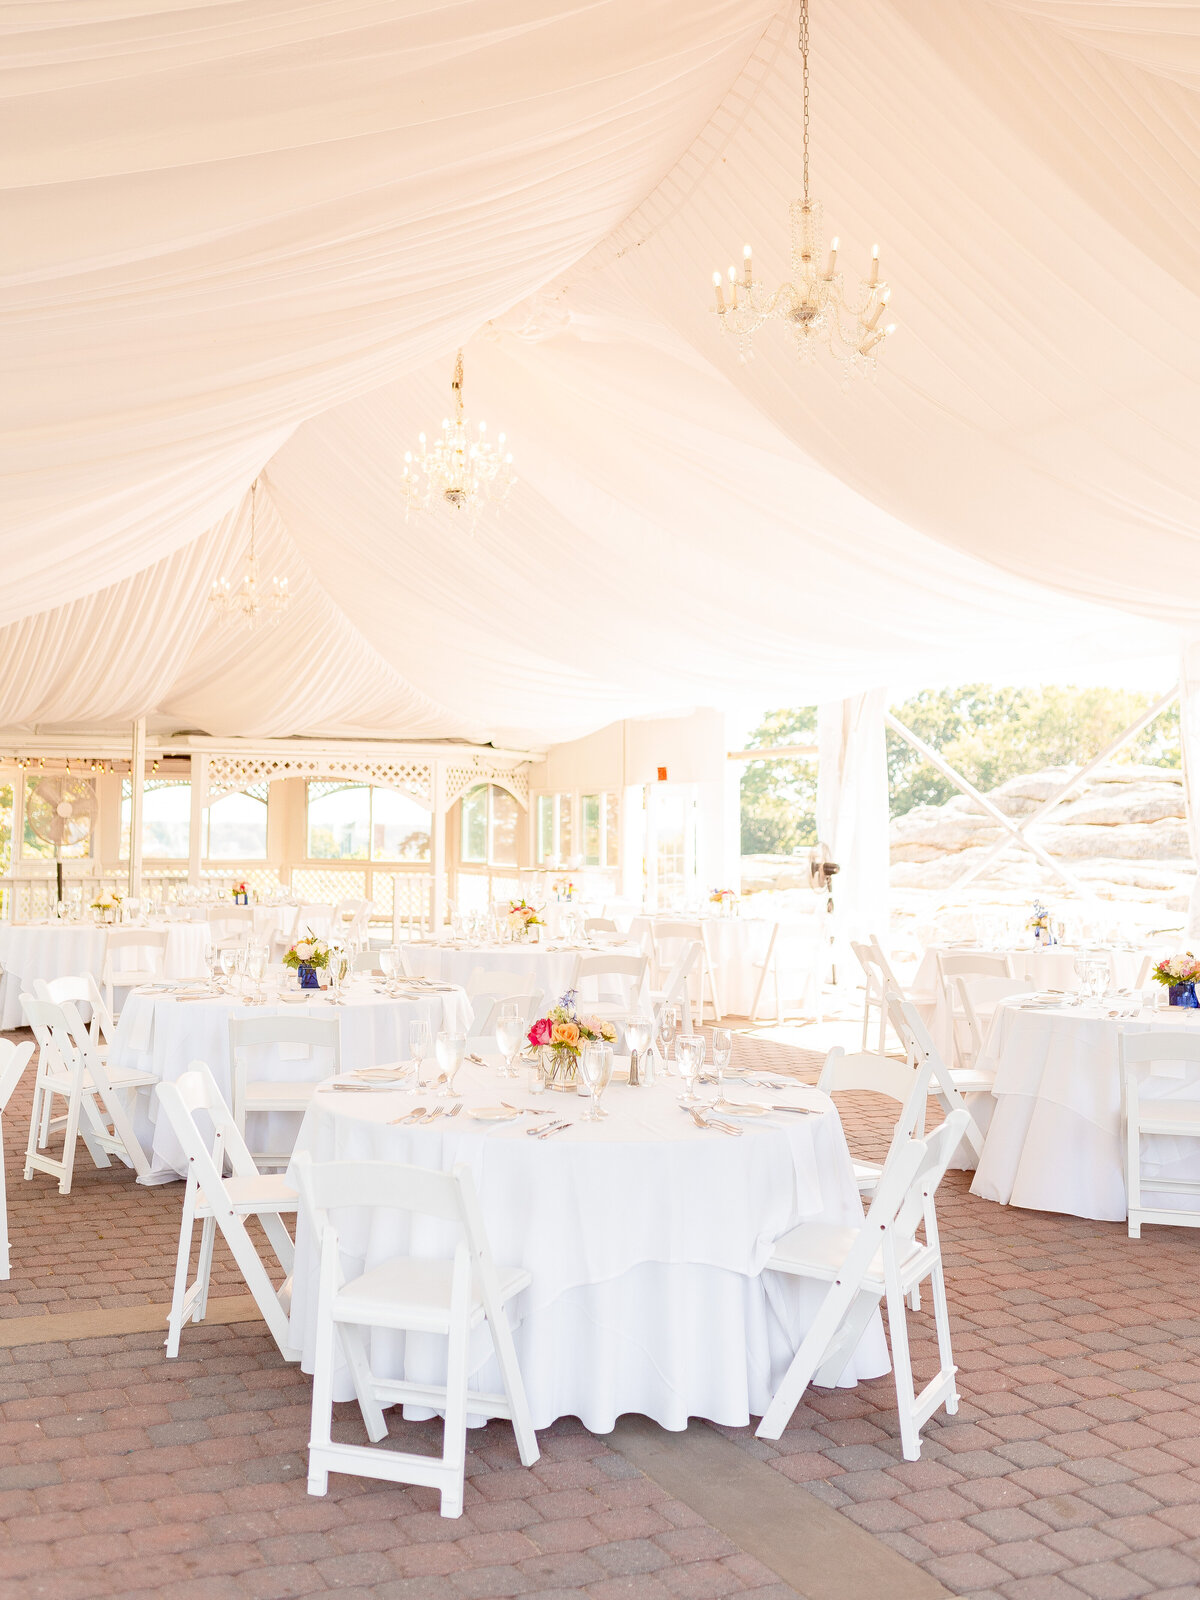 Tented wedding reception at Haley Mansion in Mystic, CT.